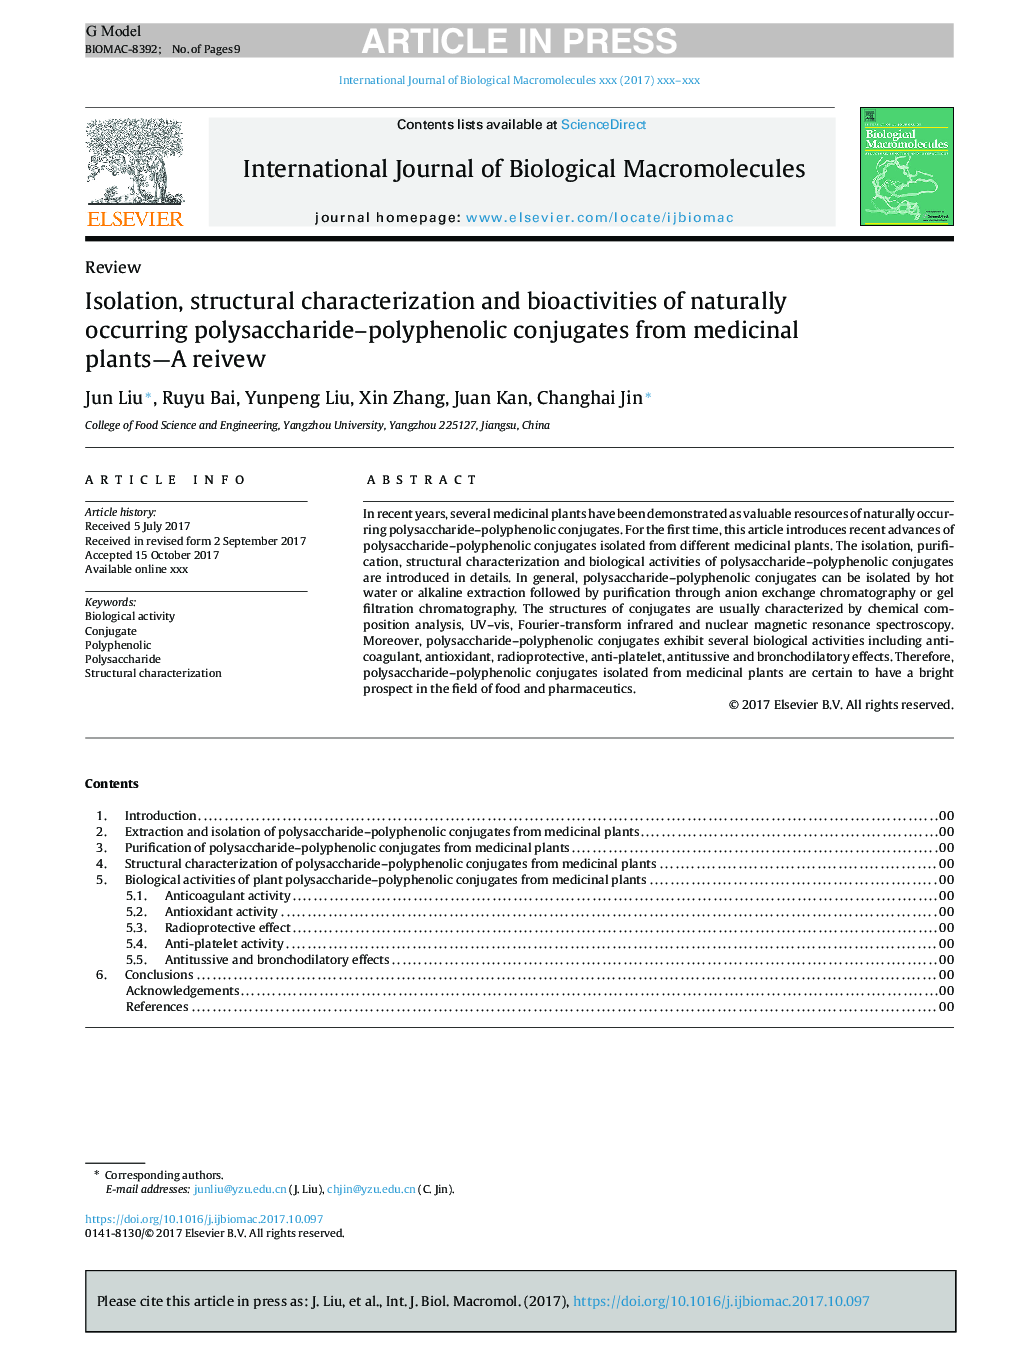 Isolation, structural characterization and bioactivities of naturally occurring polysaccharide-polyphenolic conjugates from medicinal plants-A reivew